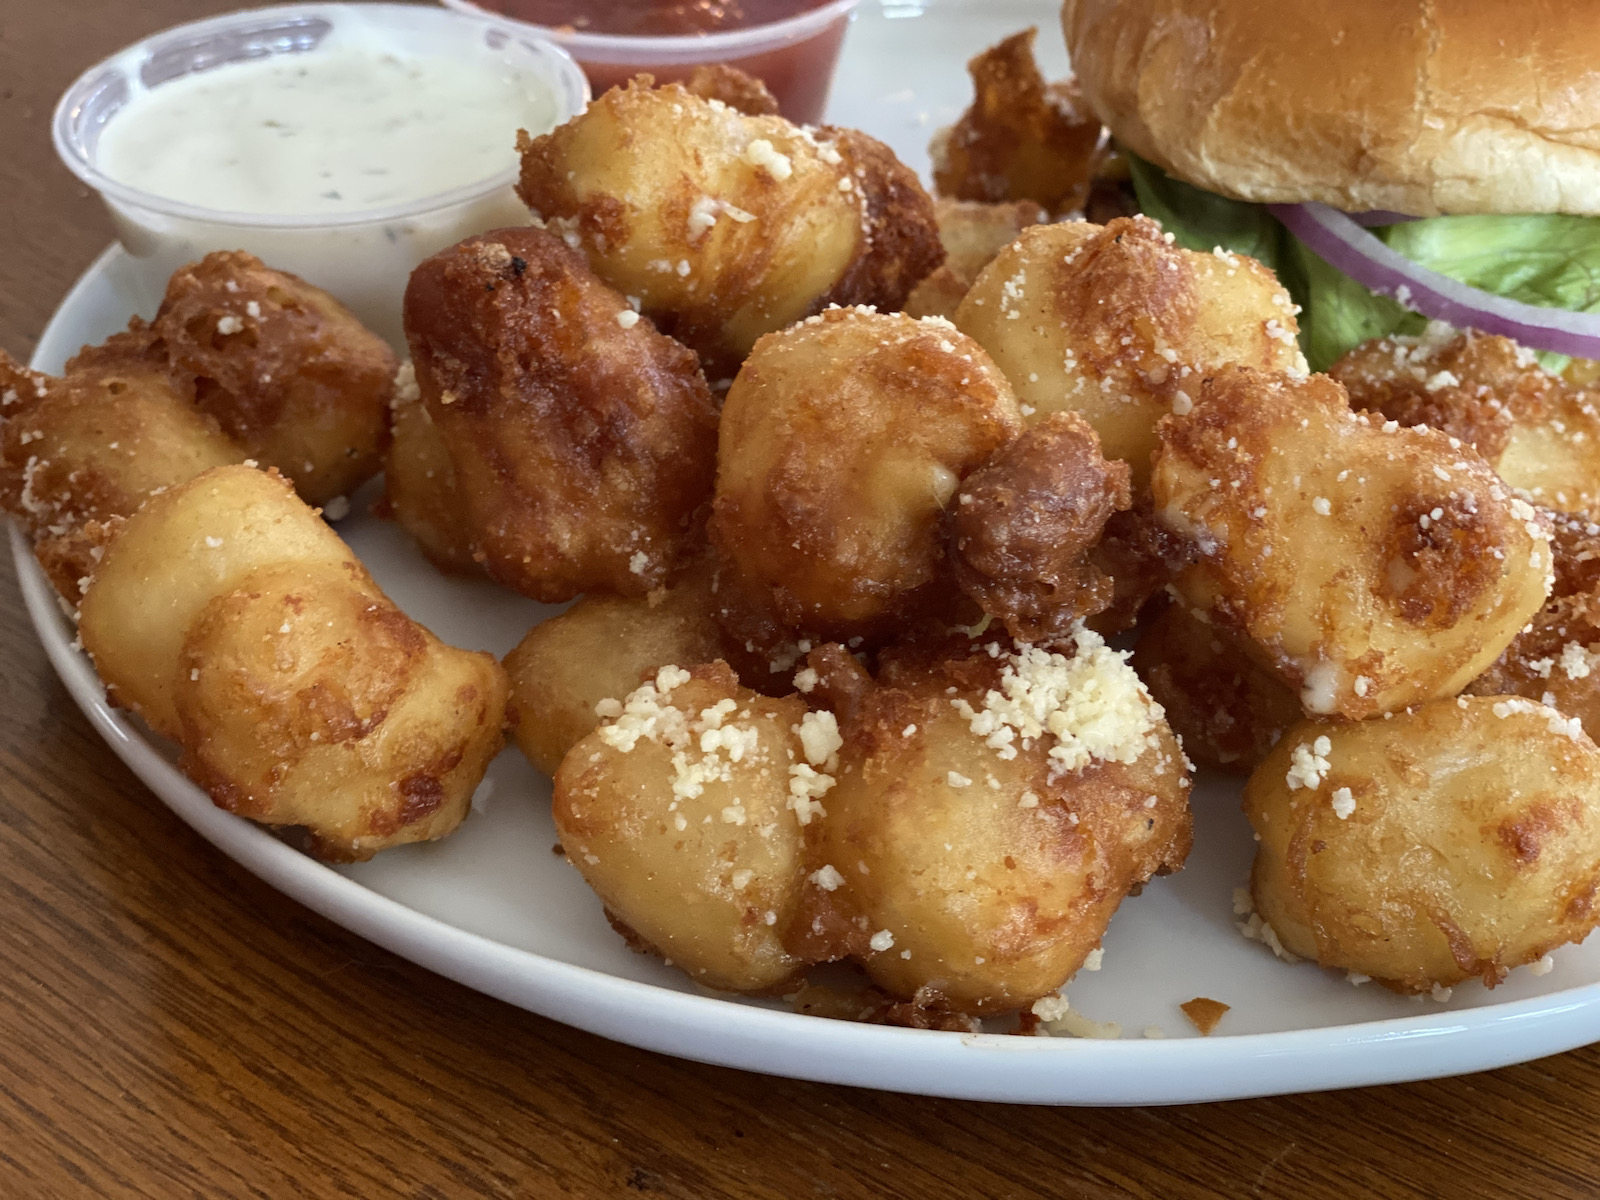 Heirloom cheese curds